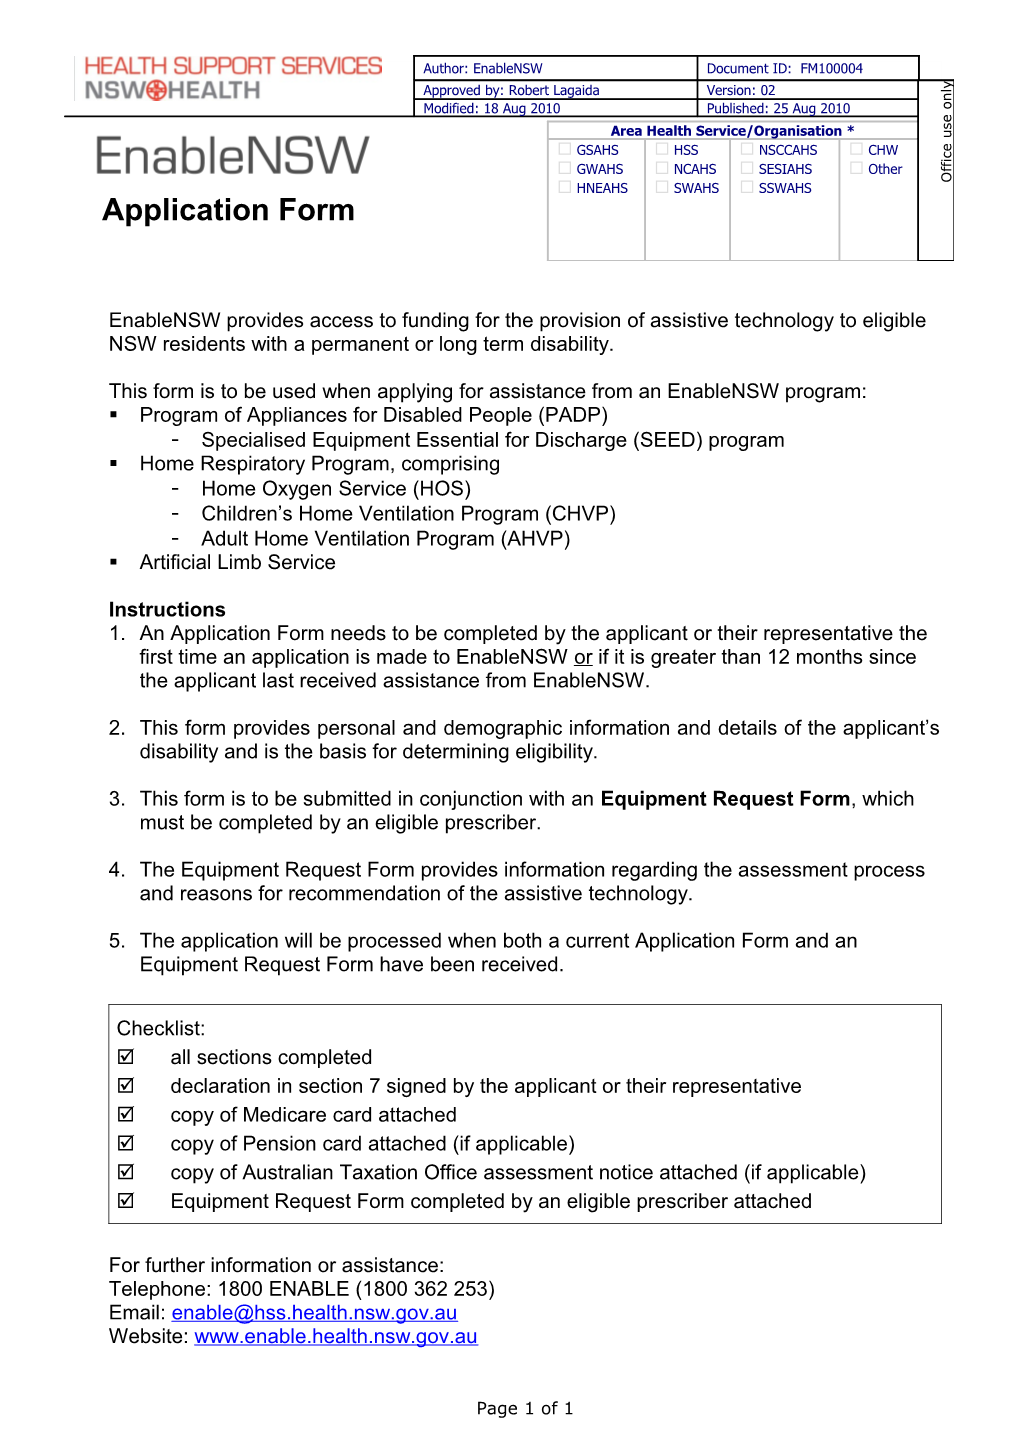 This Form Is to Be Used When Applying for Assistance from an Enablensw Program